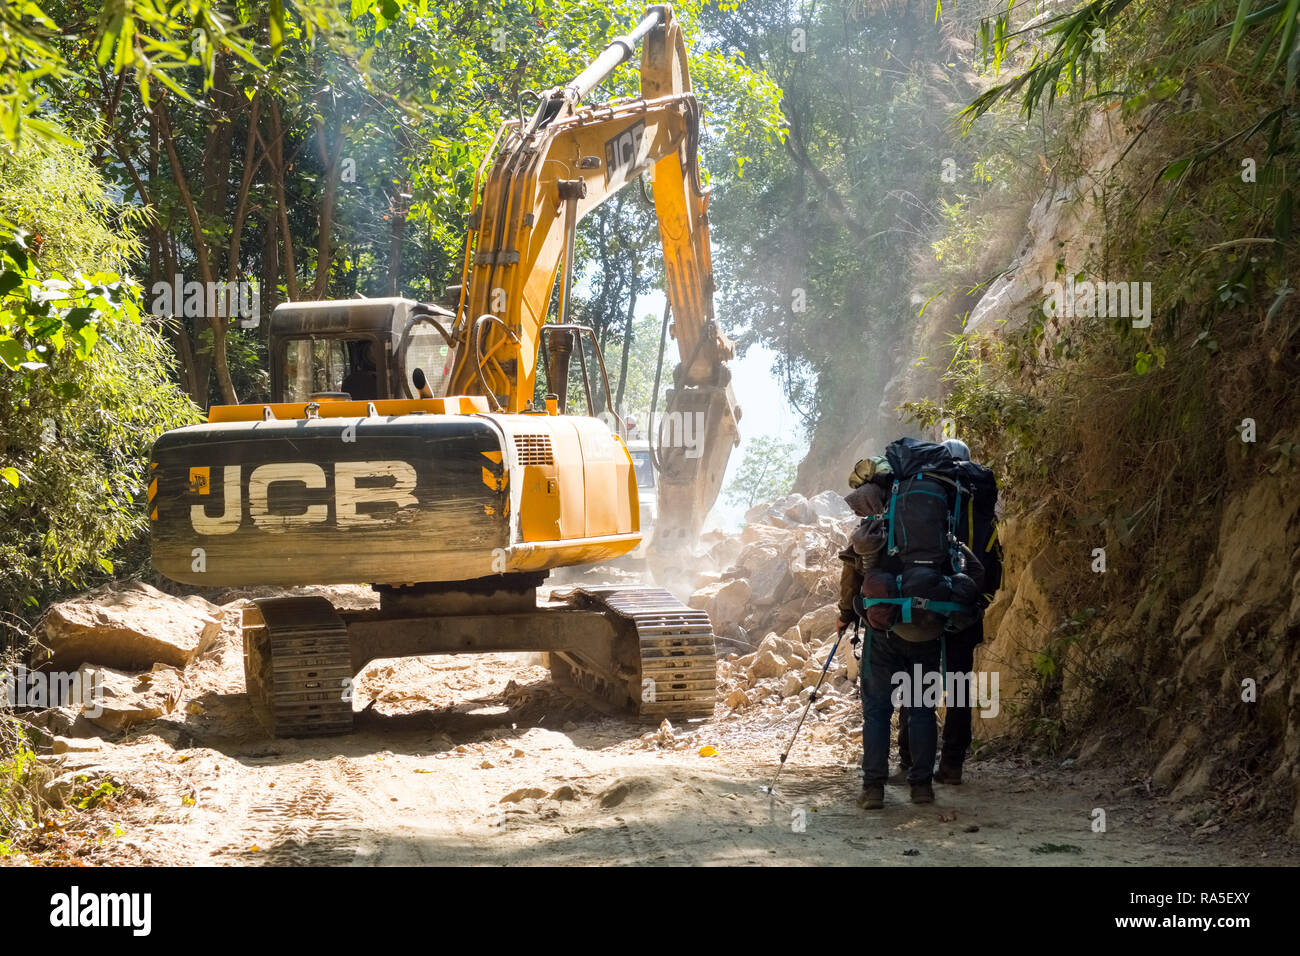 Trekkers waiting to pass a JCB excavator building a new road in the Nepal Himalayas Stock Photo